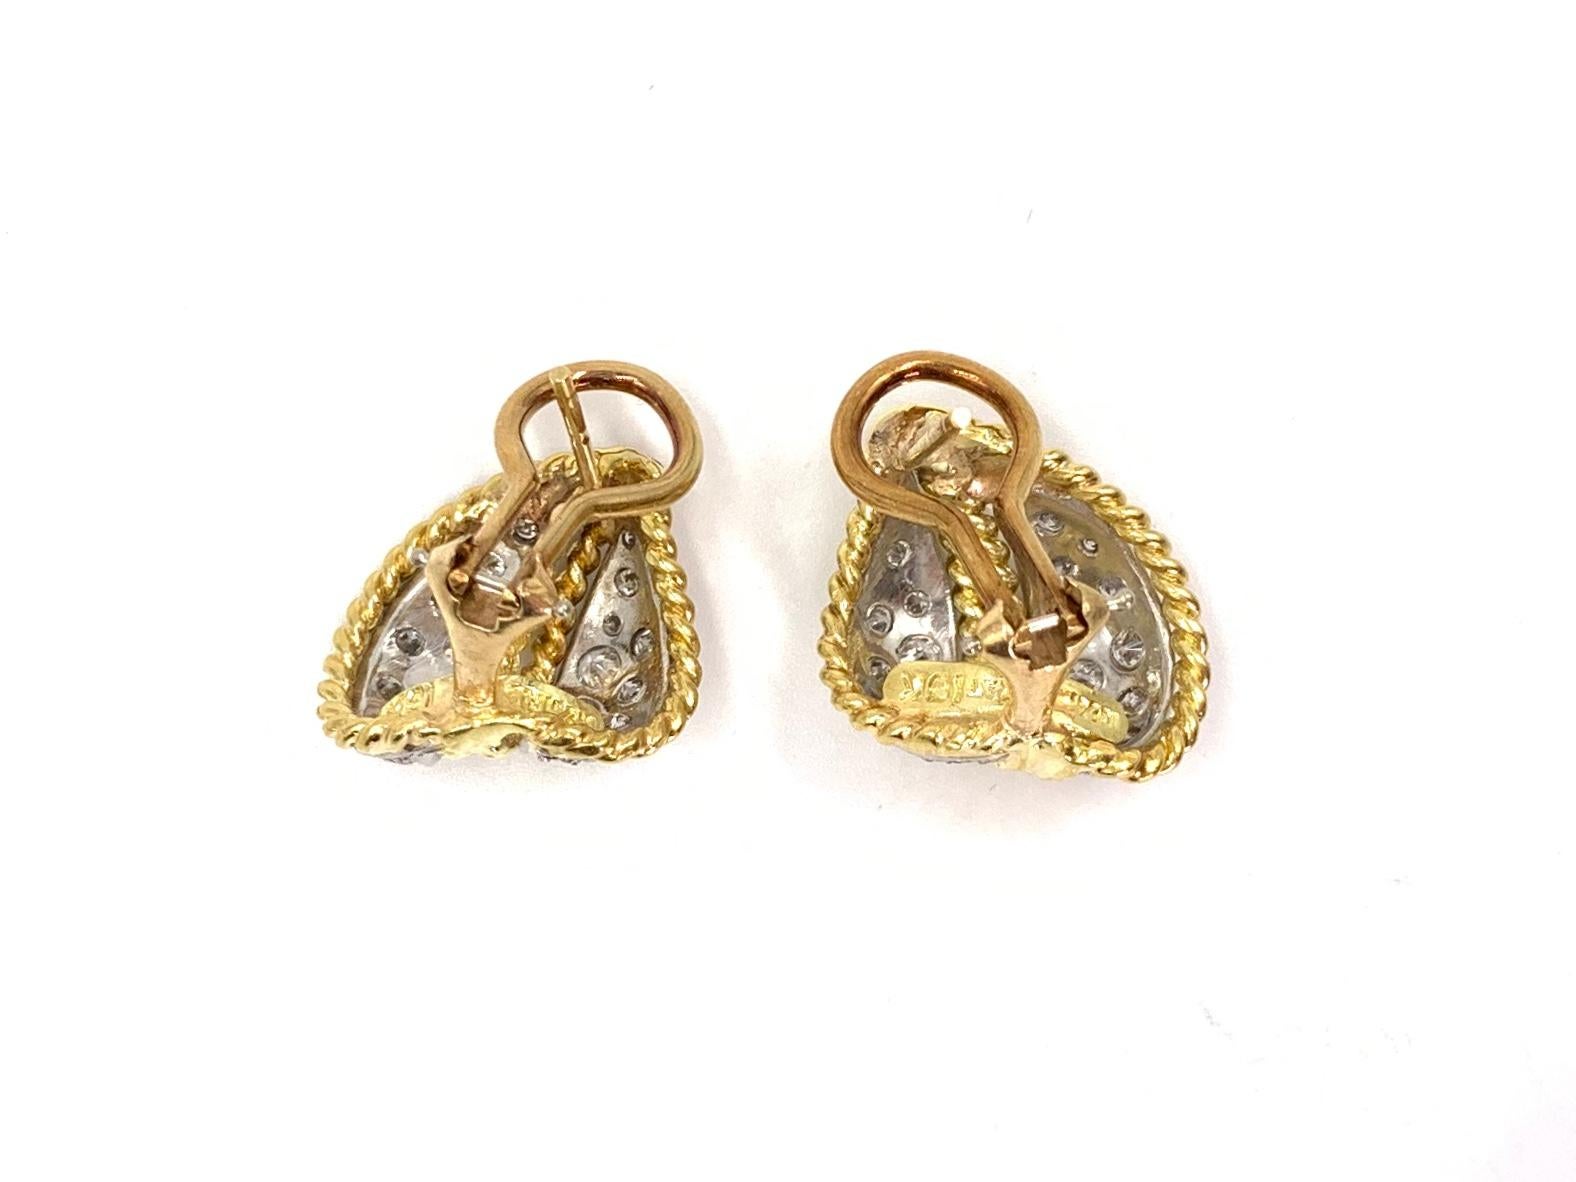 Timeless and elegant 18 karat yellow gold and platinum diamond leaf huggie style earrings featuring approximately .60 carats of white diamonds. Diamond quality is approximately F-G color, VS2 clarity. Perfect for every day wear.
Earrings are fixed